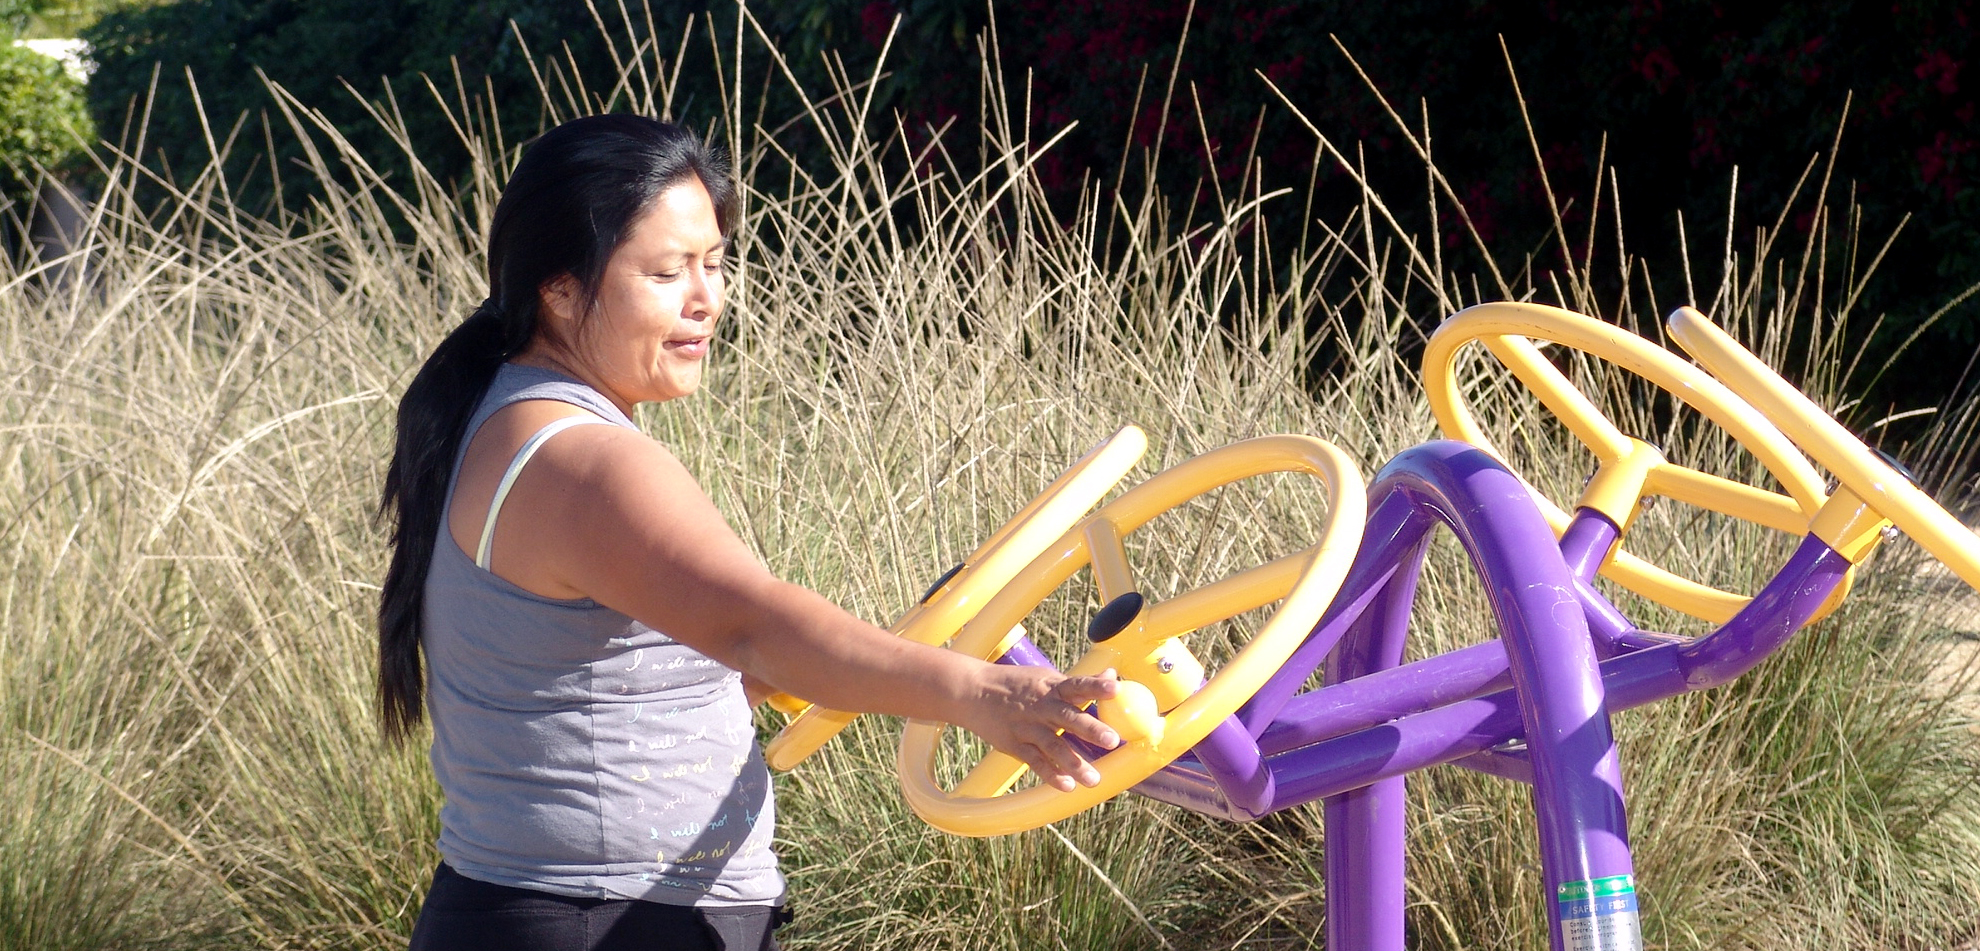 resident using the exercise equipment at maple-occidental exercise park